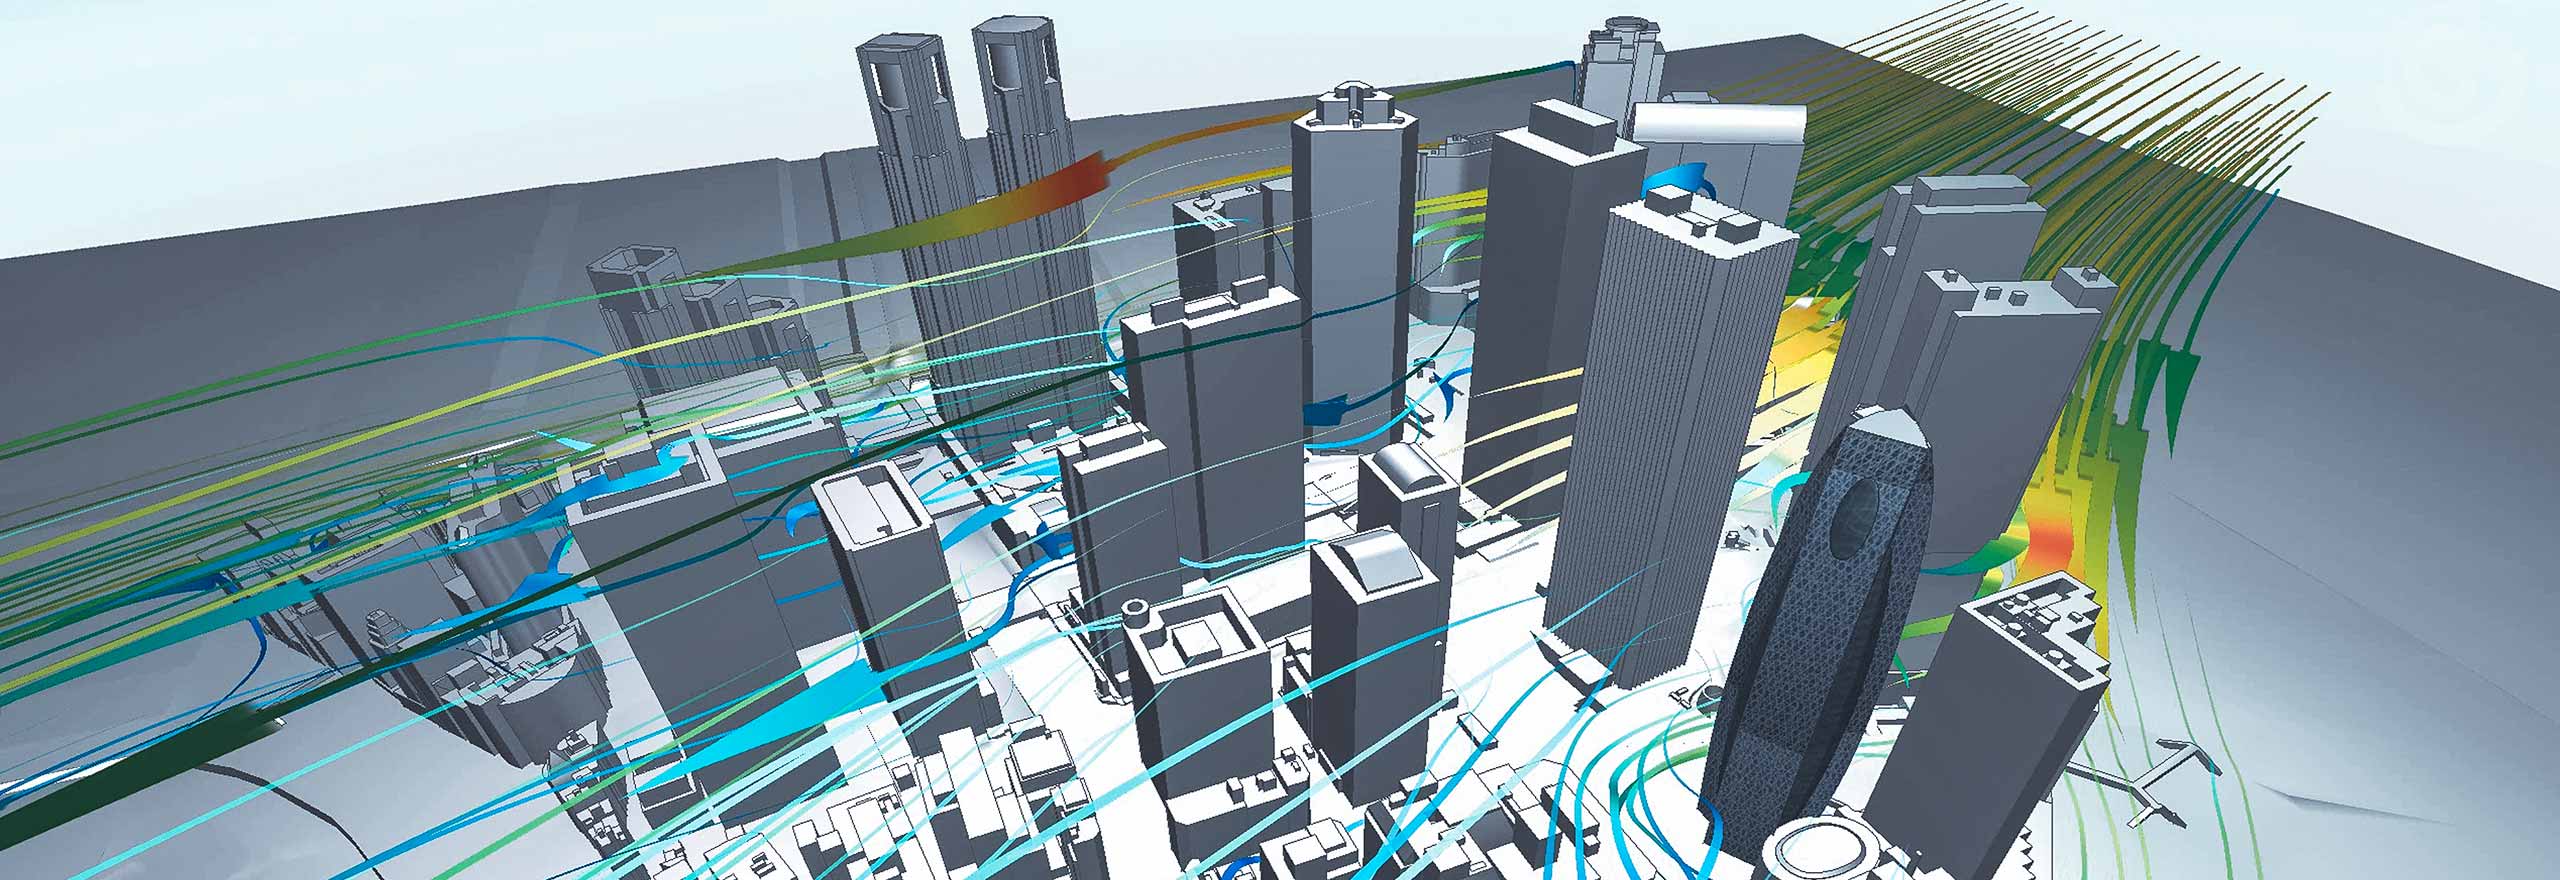 Visualisation of air flow around buildings using CFD multiphysics simulation software